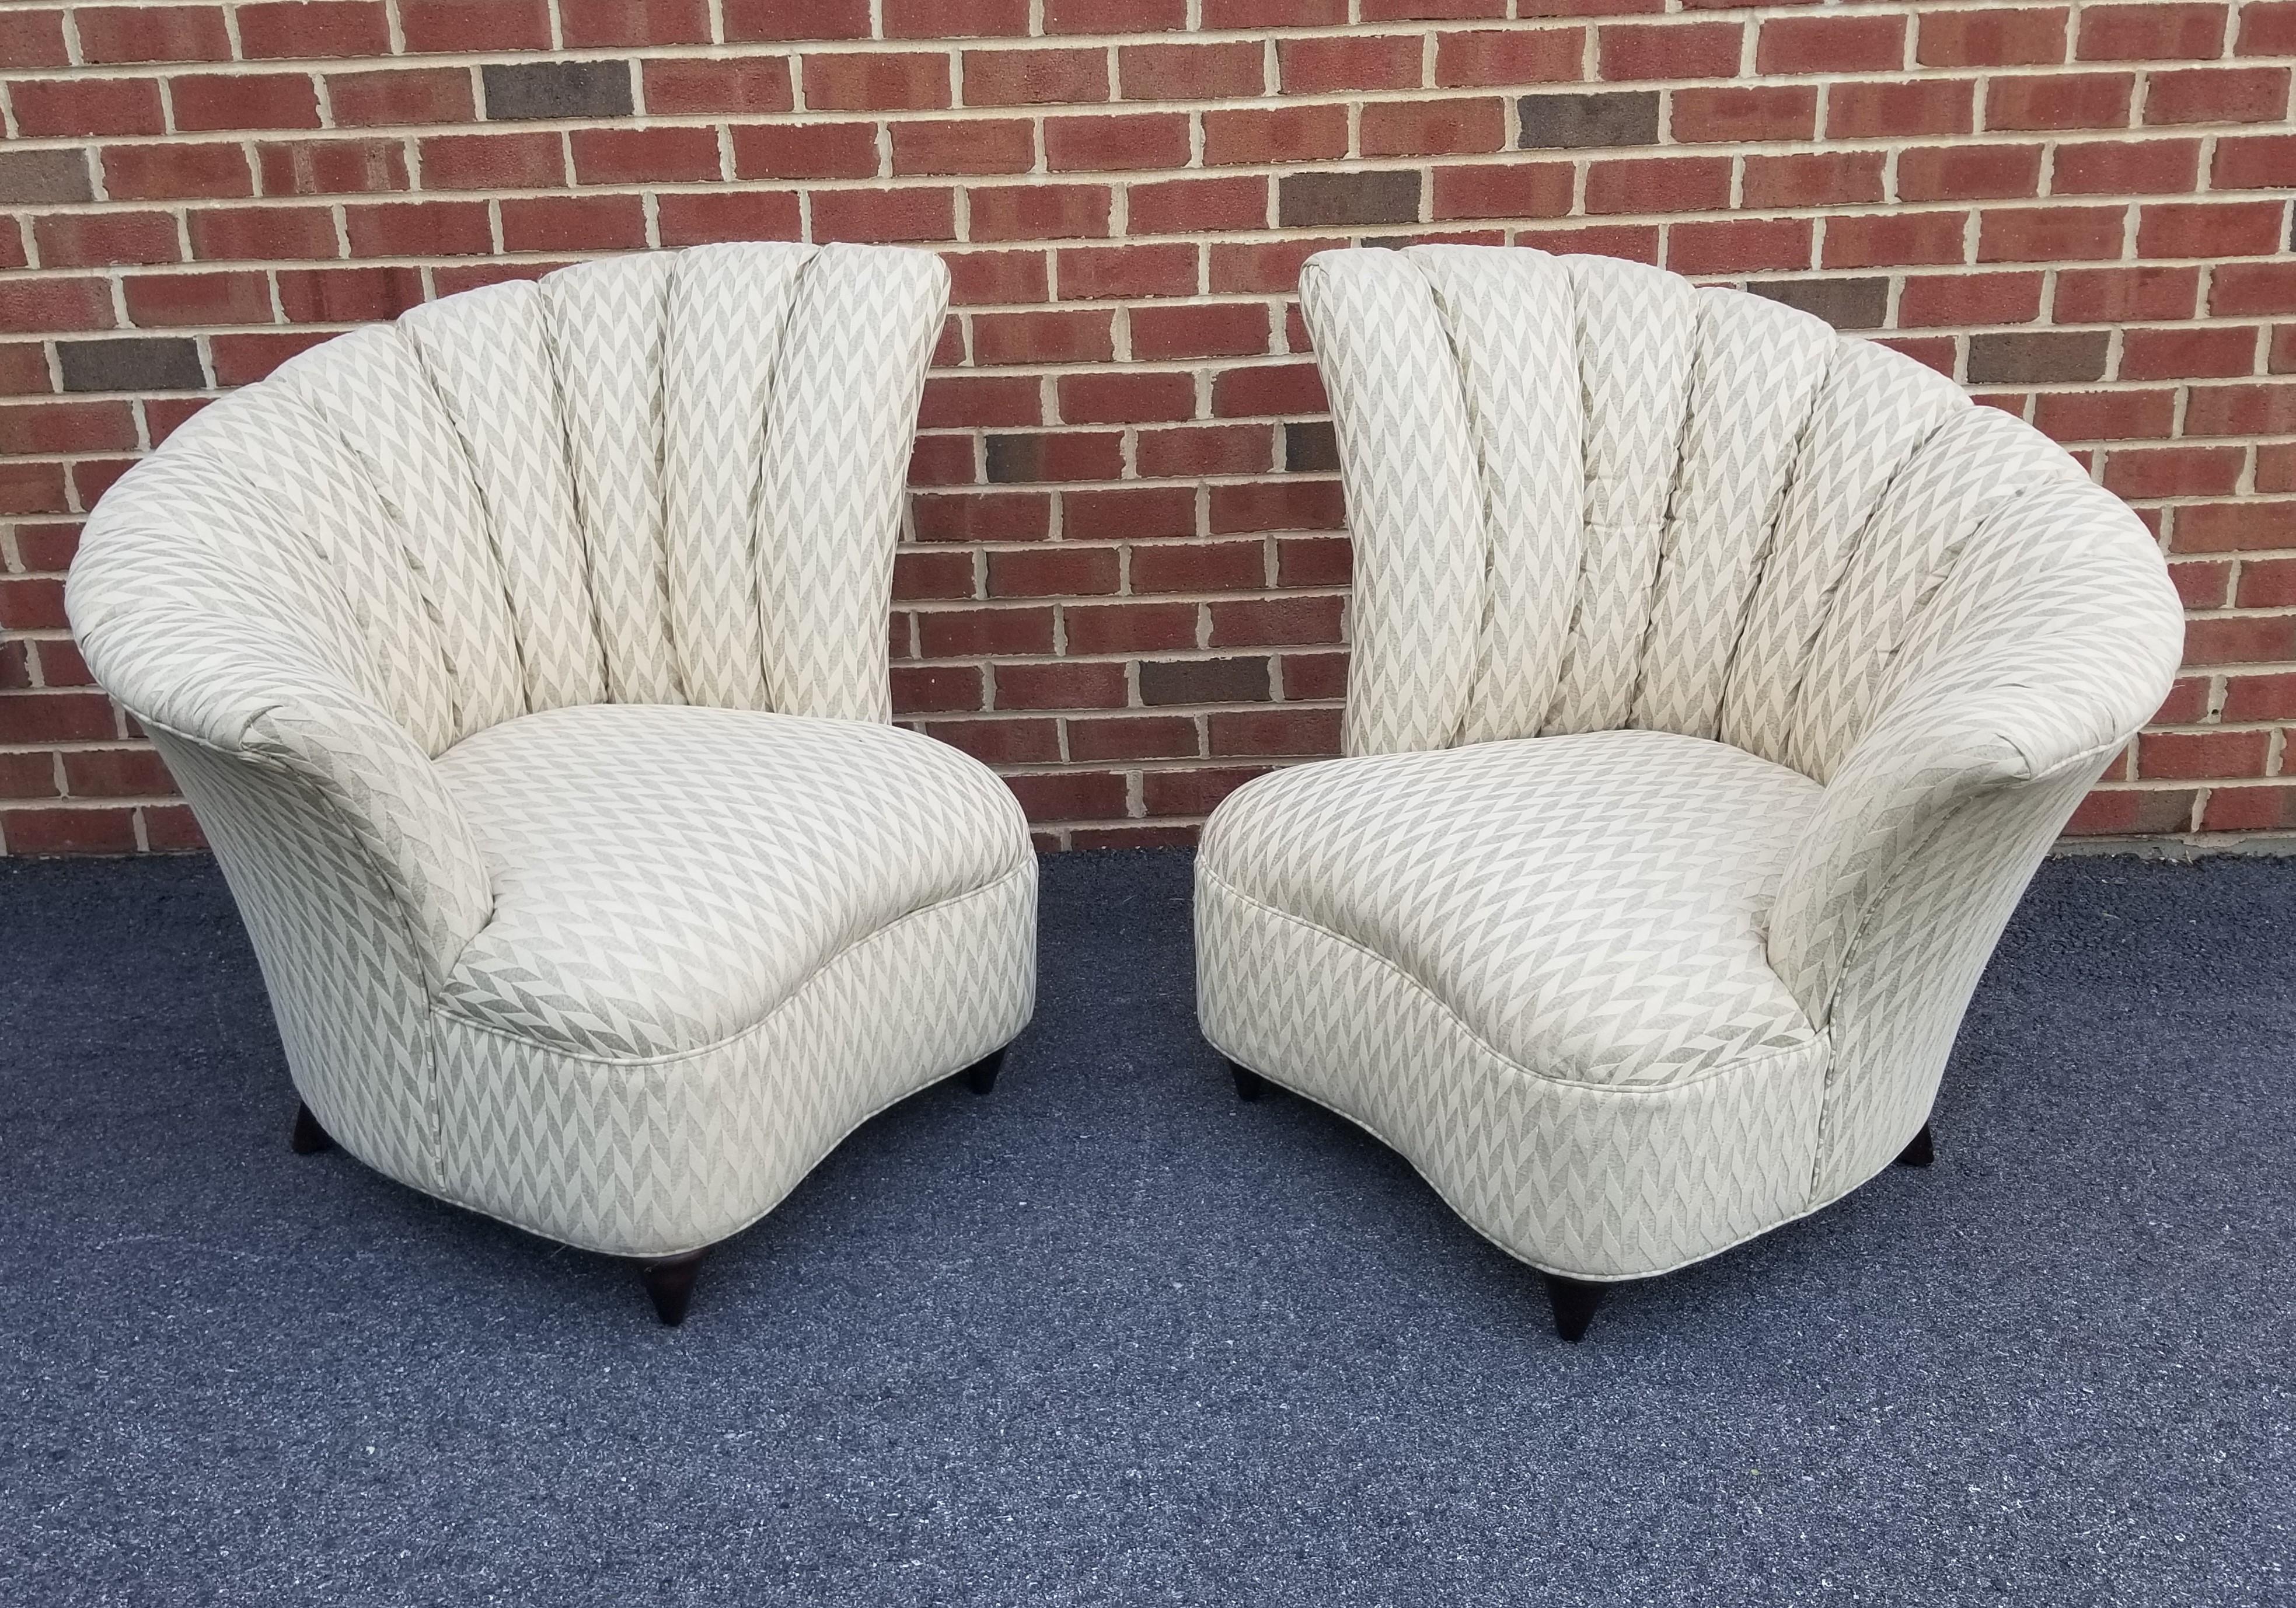 Art Deco Grosfeld House Channel / Fan Back Chairs. Iconic. Asymmetrical Design. Well made and very comfortable. Upholstery fabric is in decent condition however they are priced accordingly for buyer to reupholster. 

We offer complimentary local